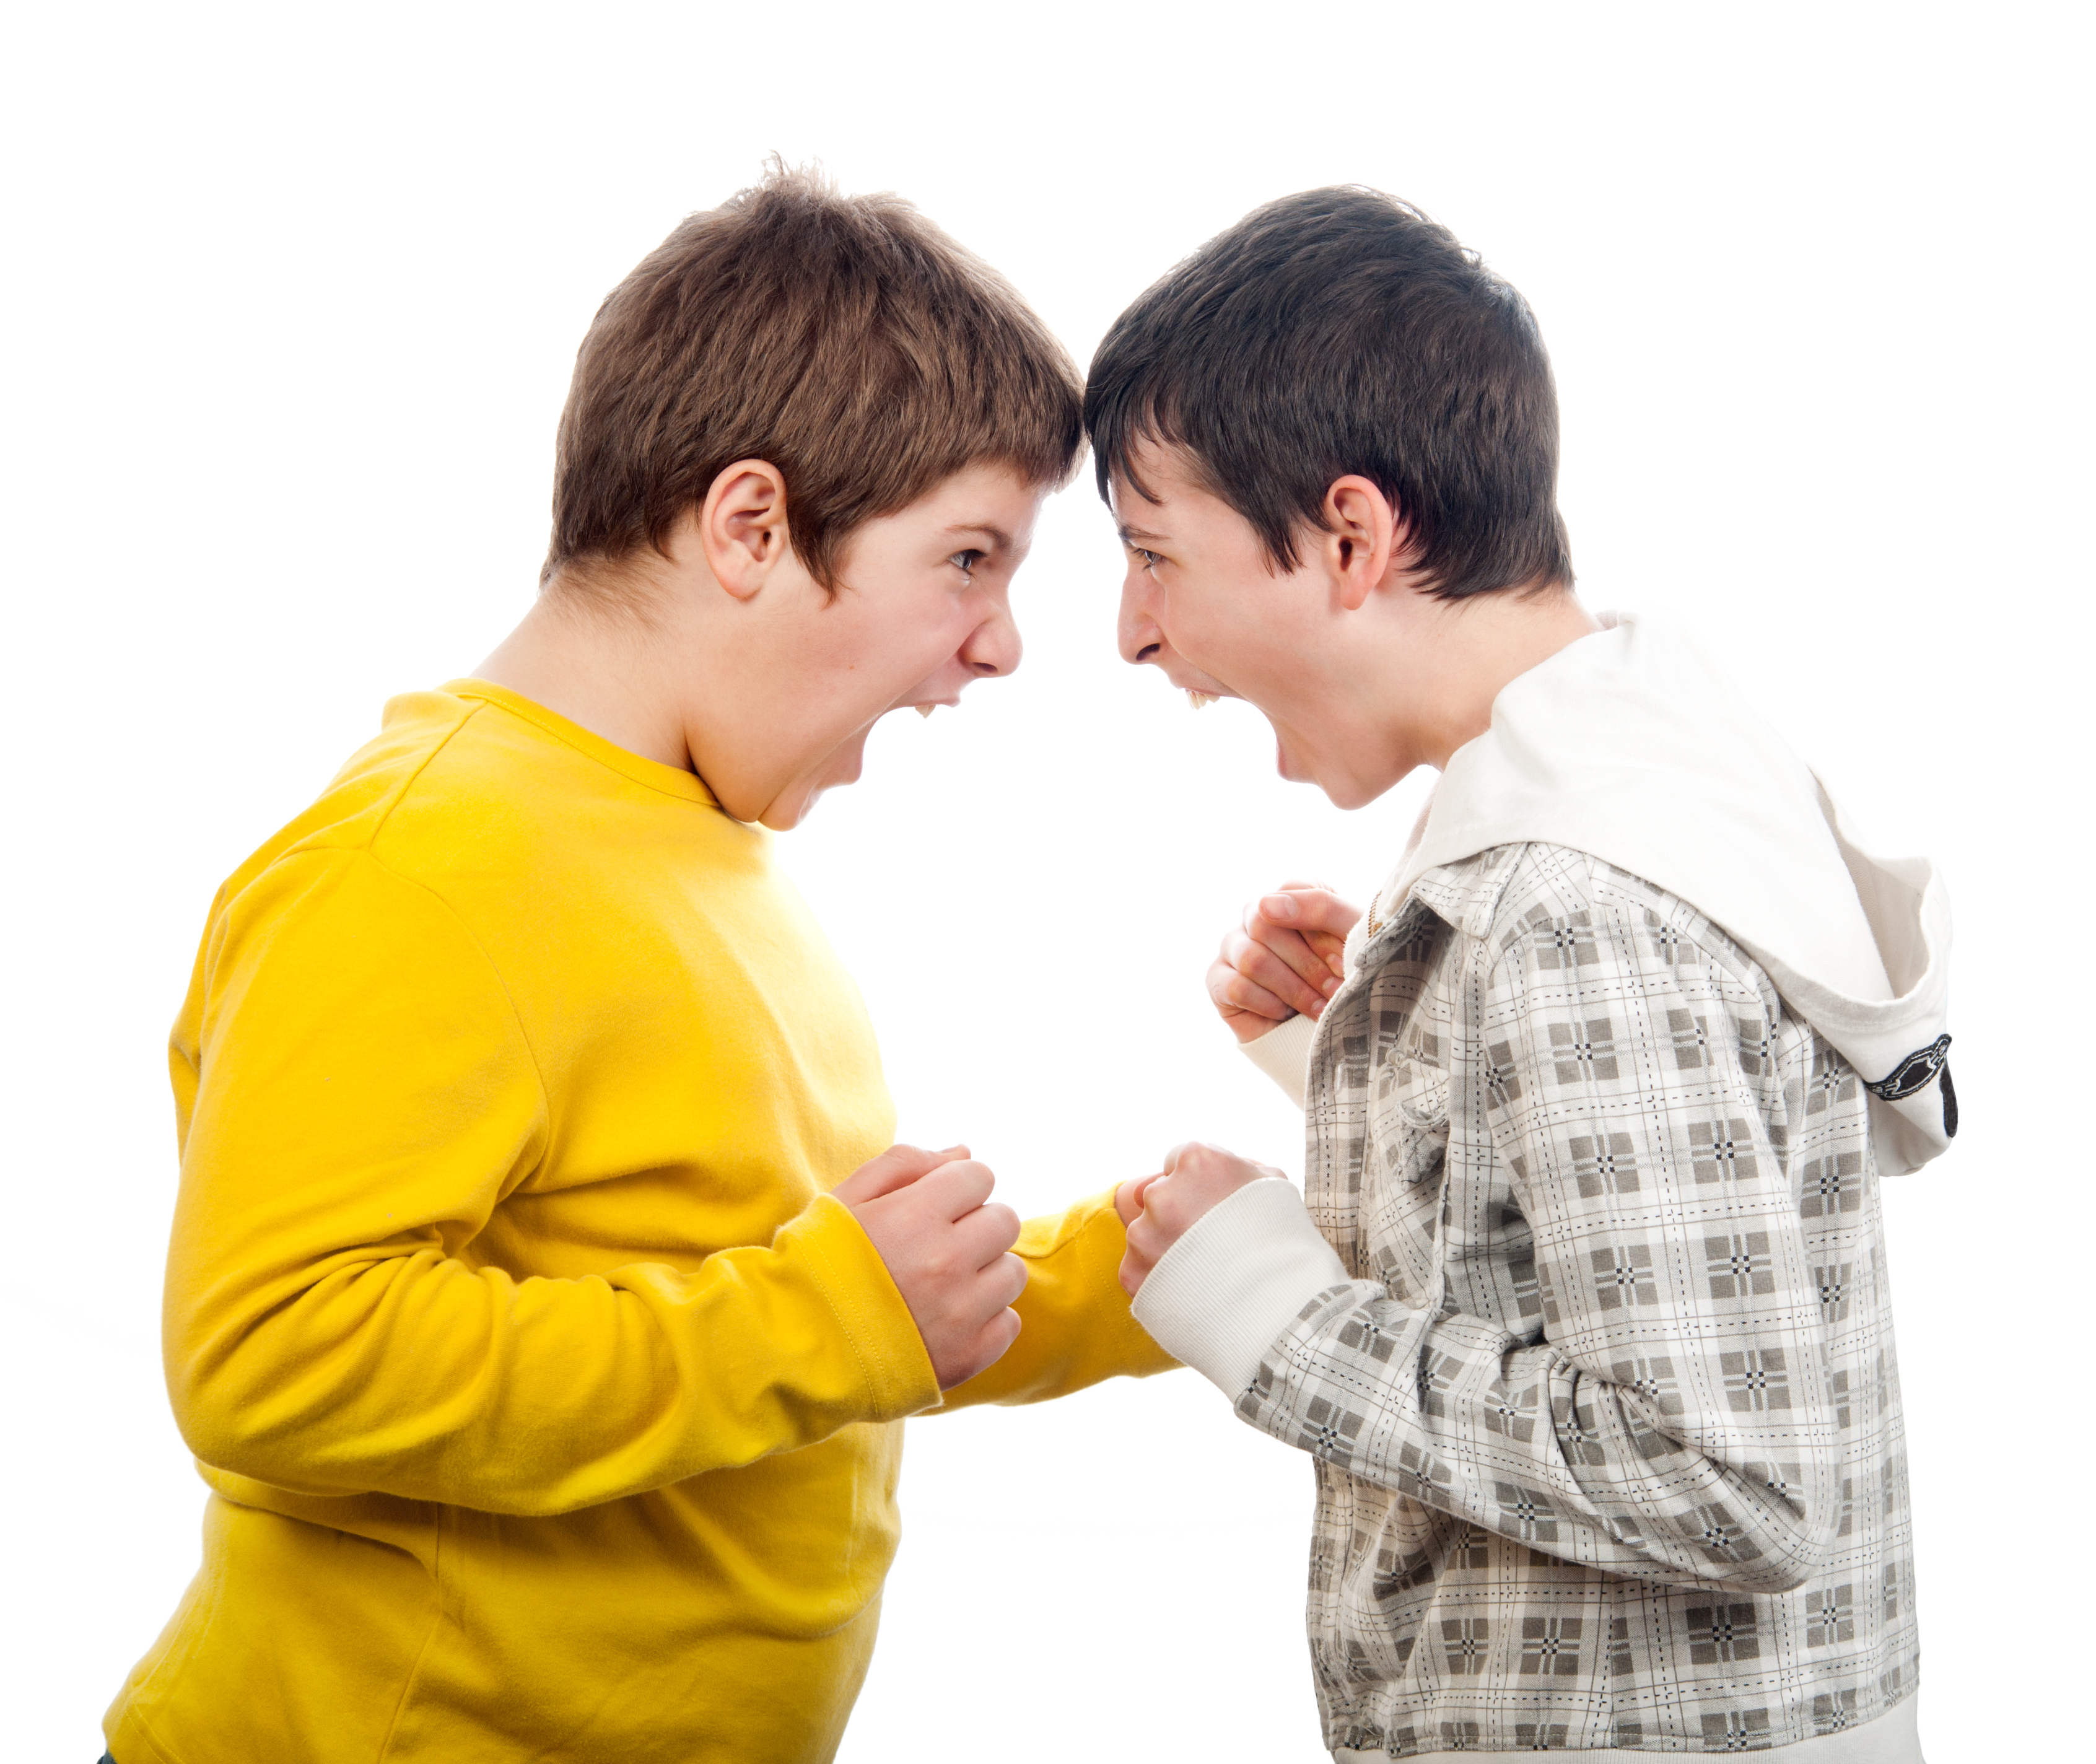 Teenage boys yelling at each other | Source: Shutterstock